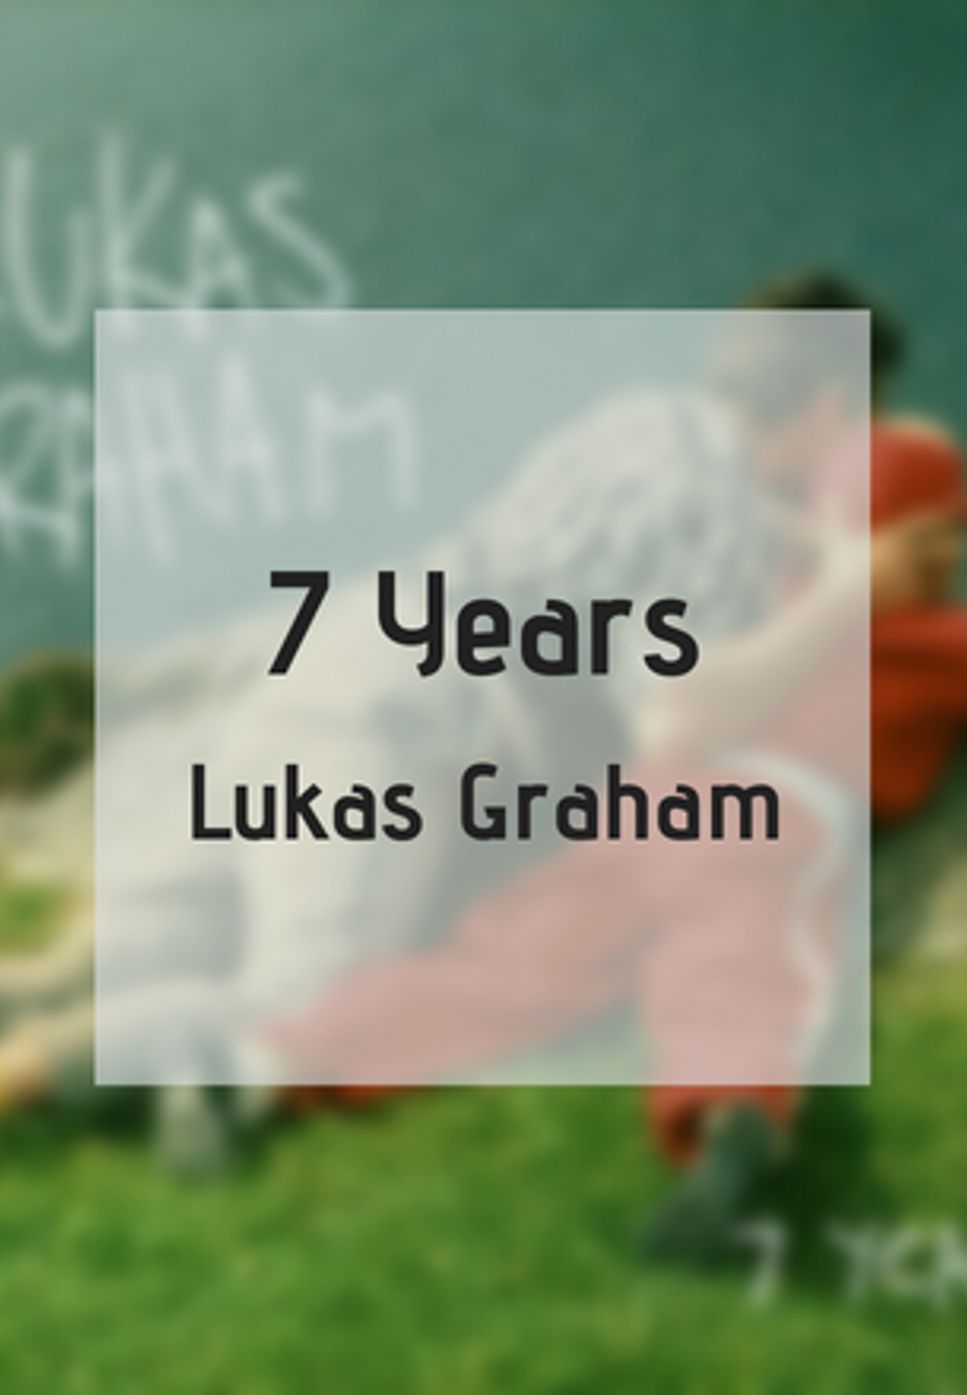 Lukas Graham - 7 Years by GuestinPiano